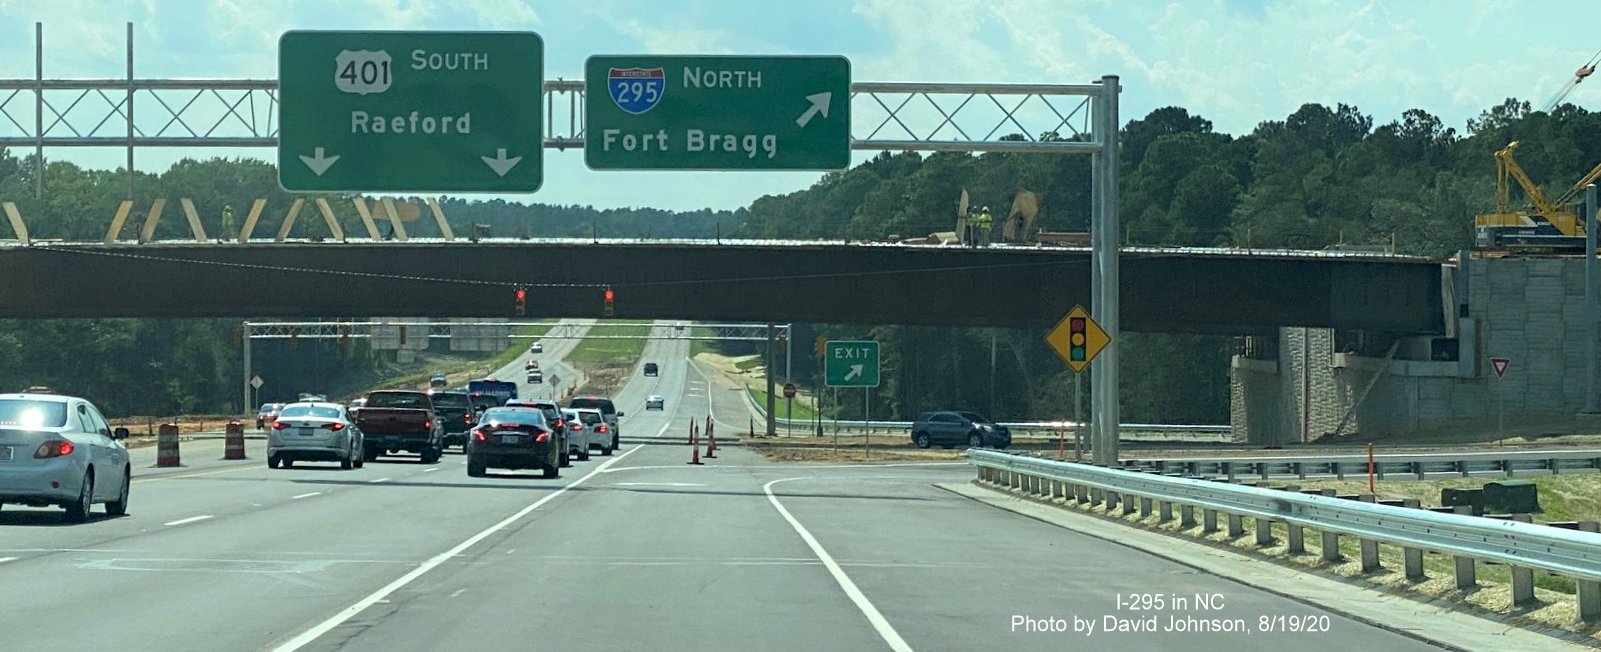 Image of North I-295 overhead ramp sign on US 401 South in Fayetteville at opened interchange, 
                                     photo by David Johnson August 2020